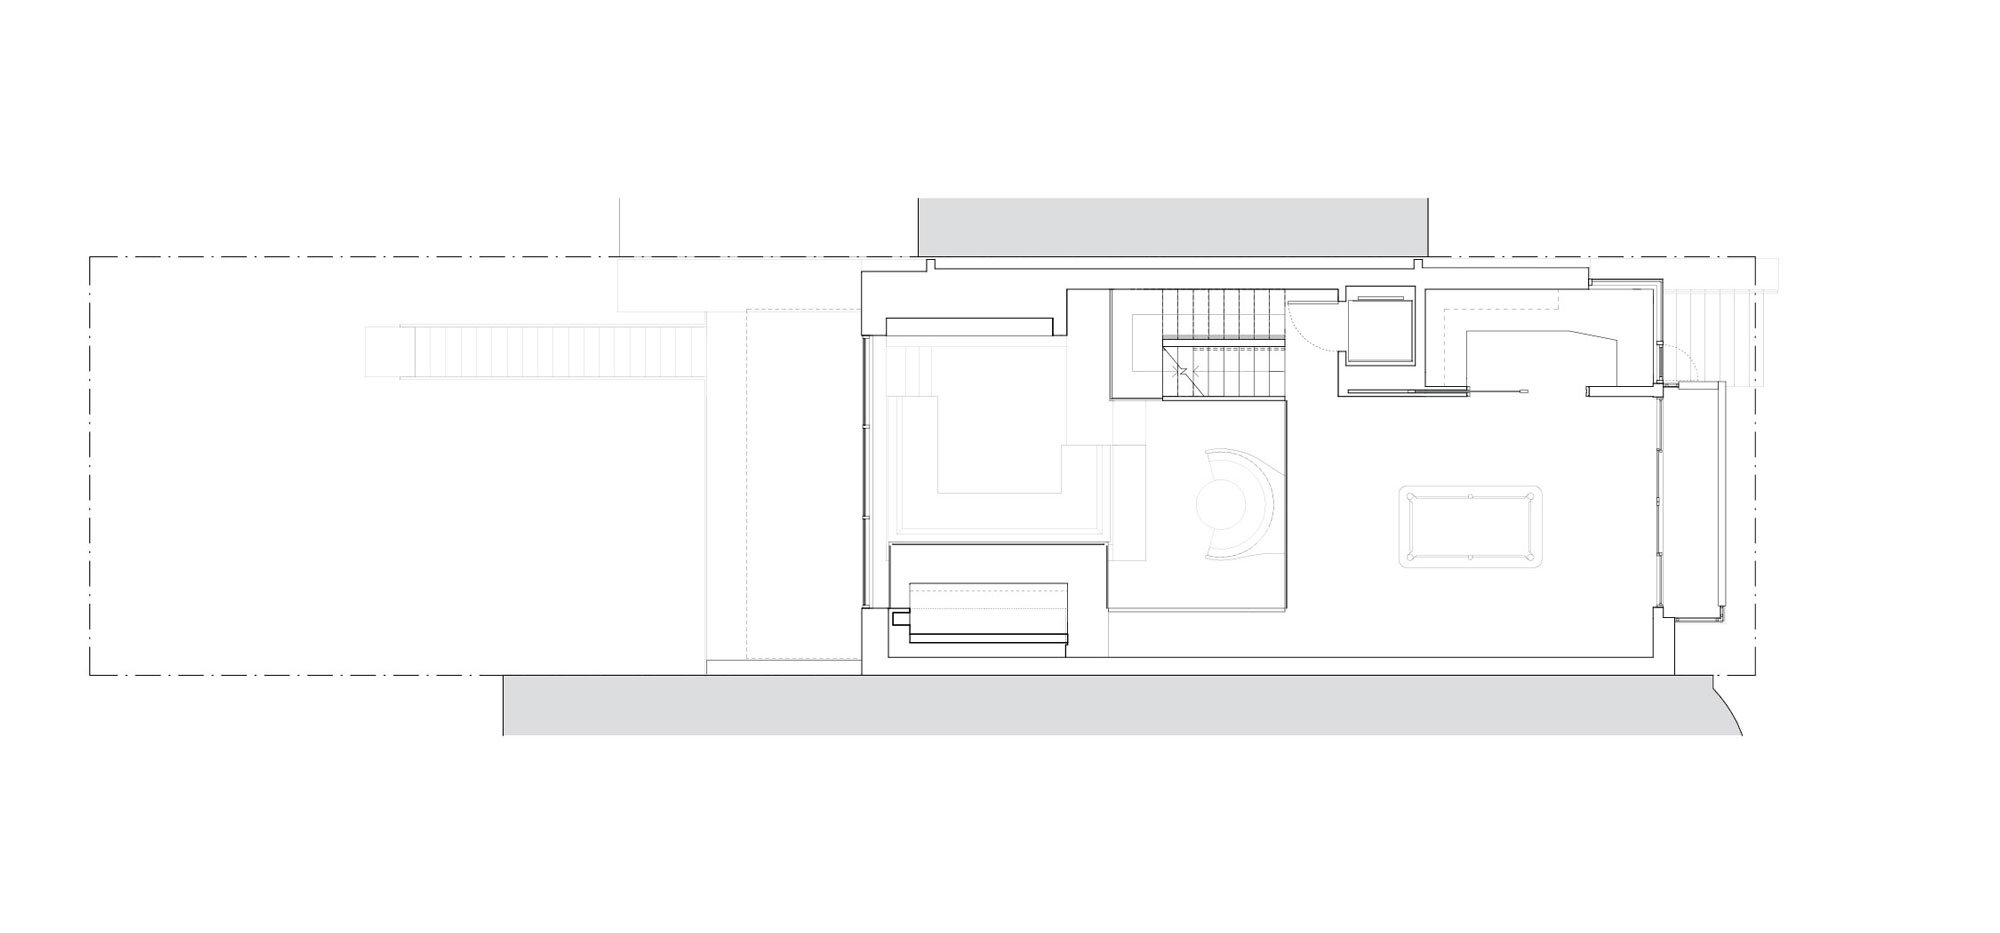 03-res4-re4a-resolution-4-architecture-park-slope-townhouse-brooklyn-modern-home-floor-plan.jpg